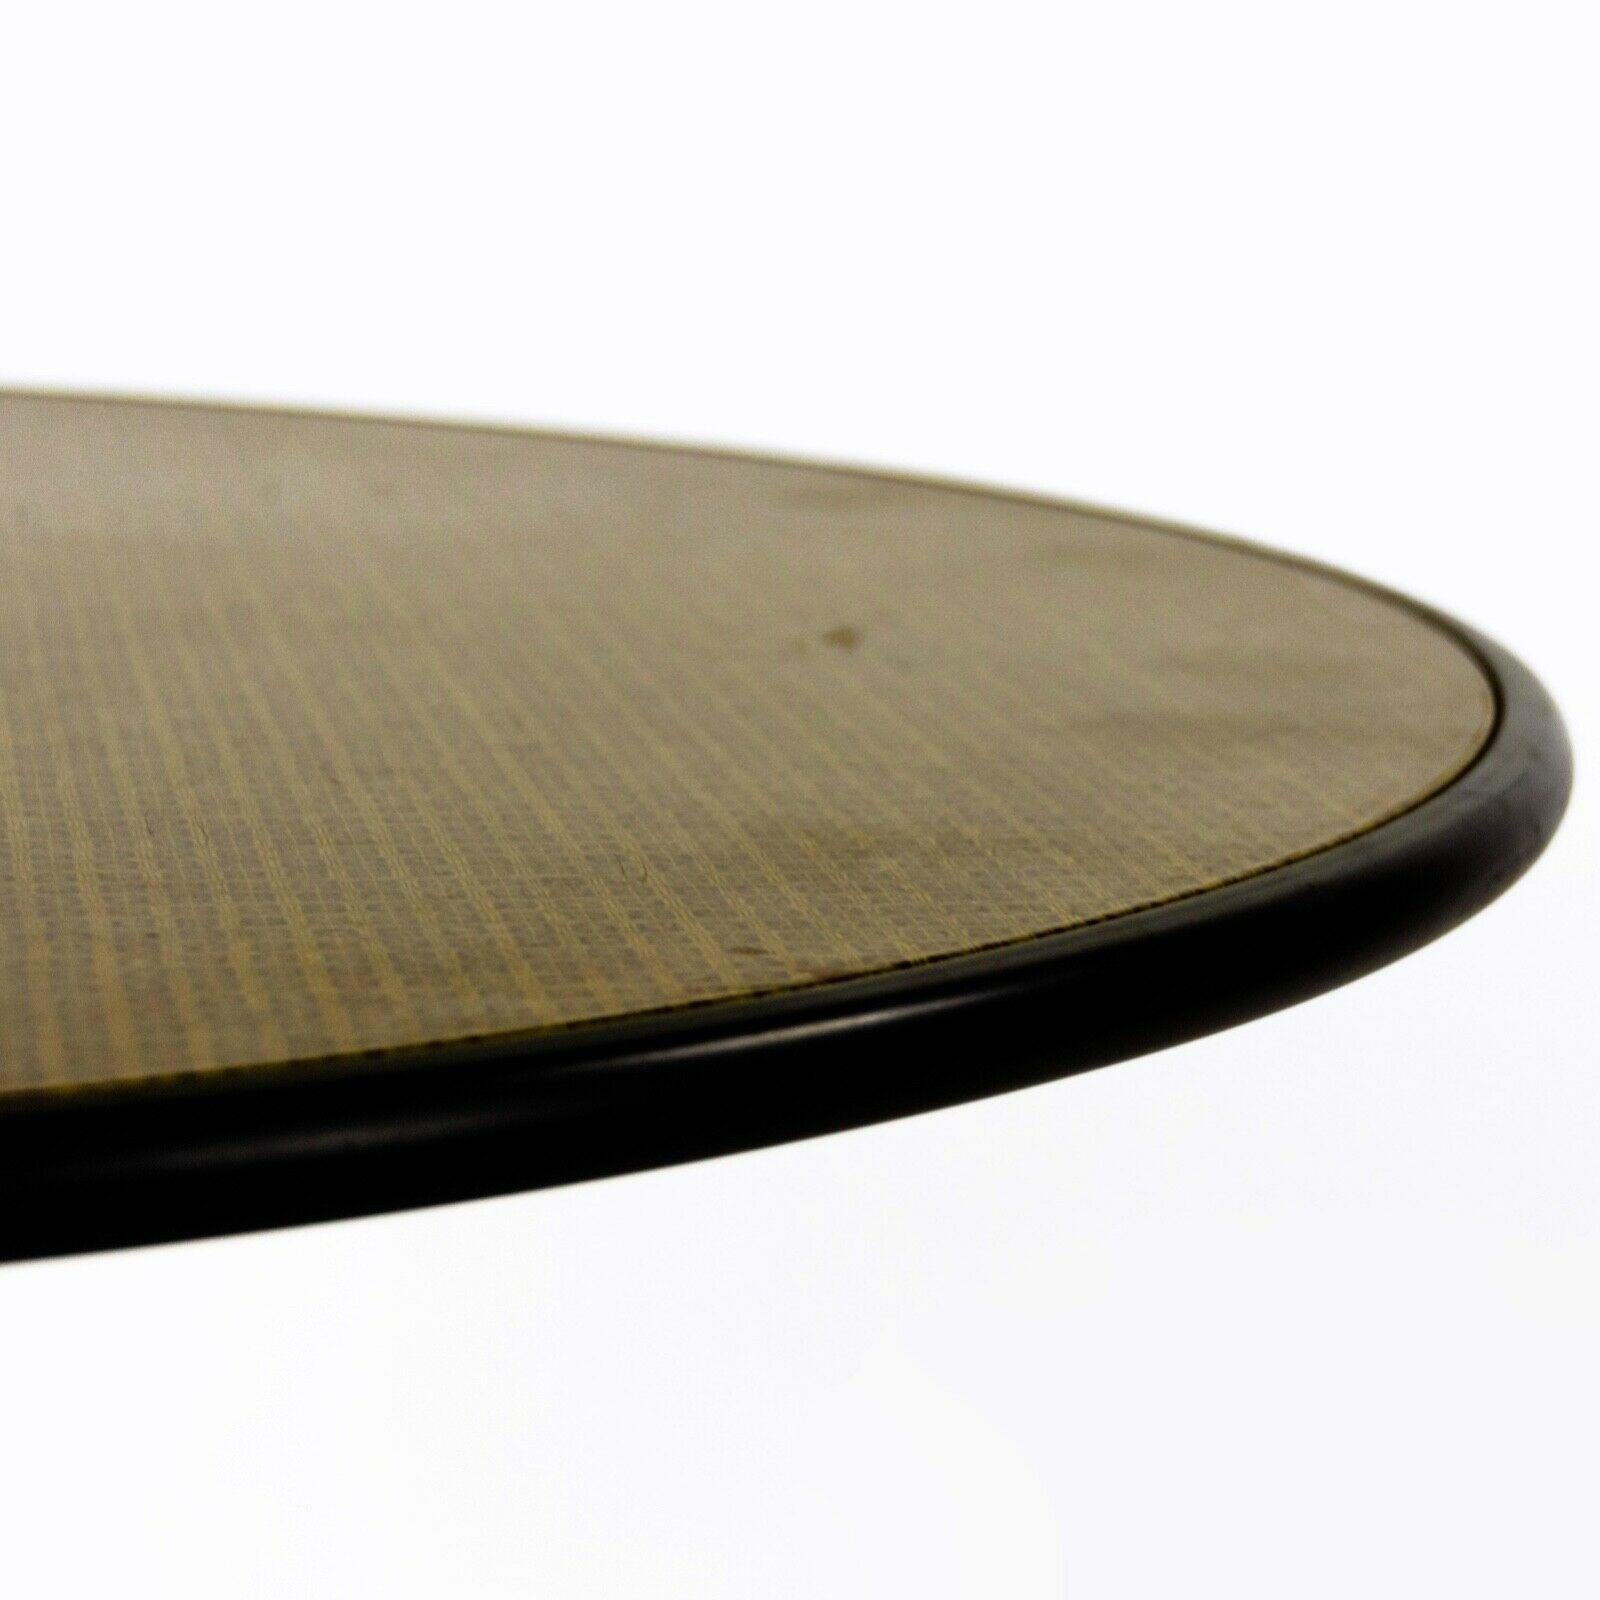 Aluminum 1967 Rare Alexander Girard/Ray Eames/Charles Eames Coffee Table w/ Gold Laminate For Sale